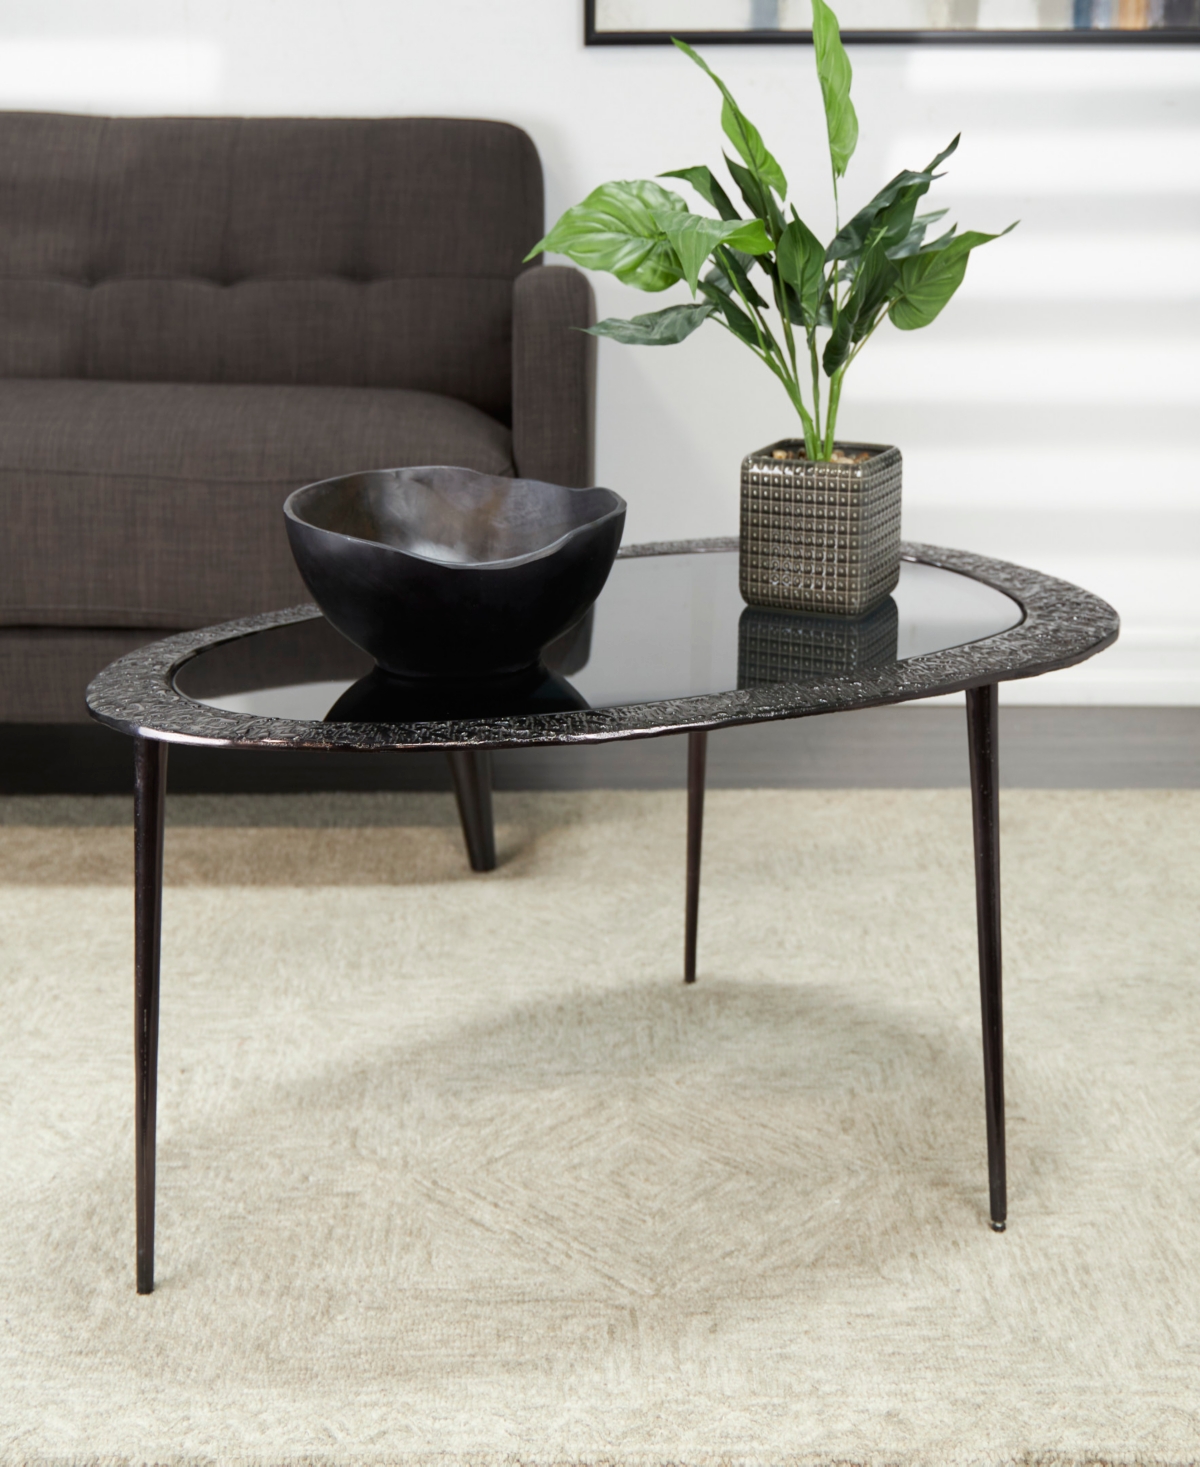 Shop Rosemary Lane 30" X 25" X 18" Aluminum Abstract Oval Shaped Shaded Glass Top And Detailed Engravings Coffee Table In Black